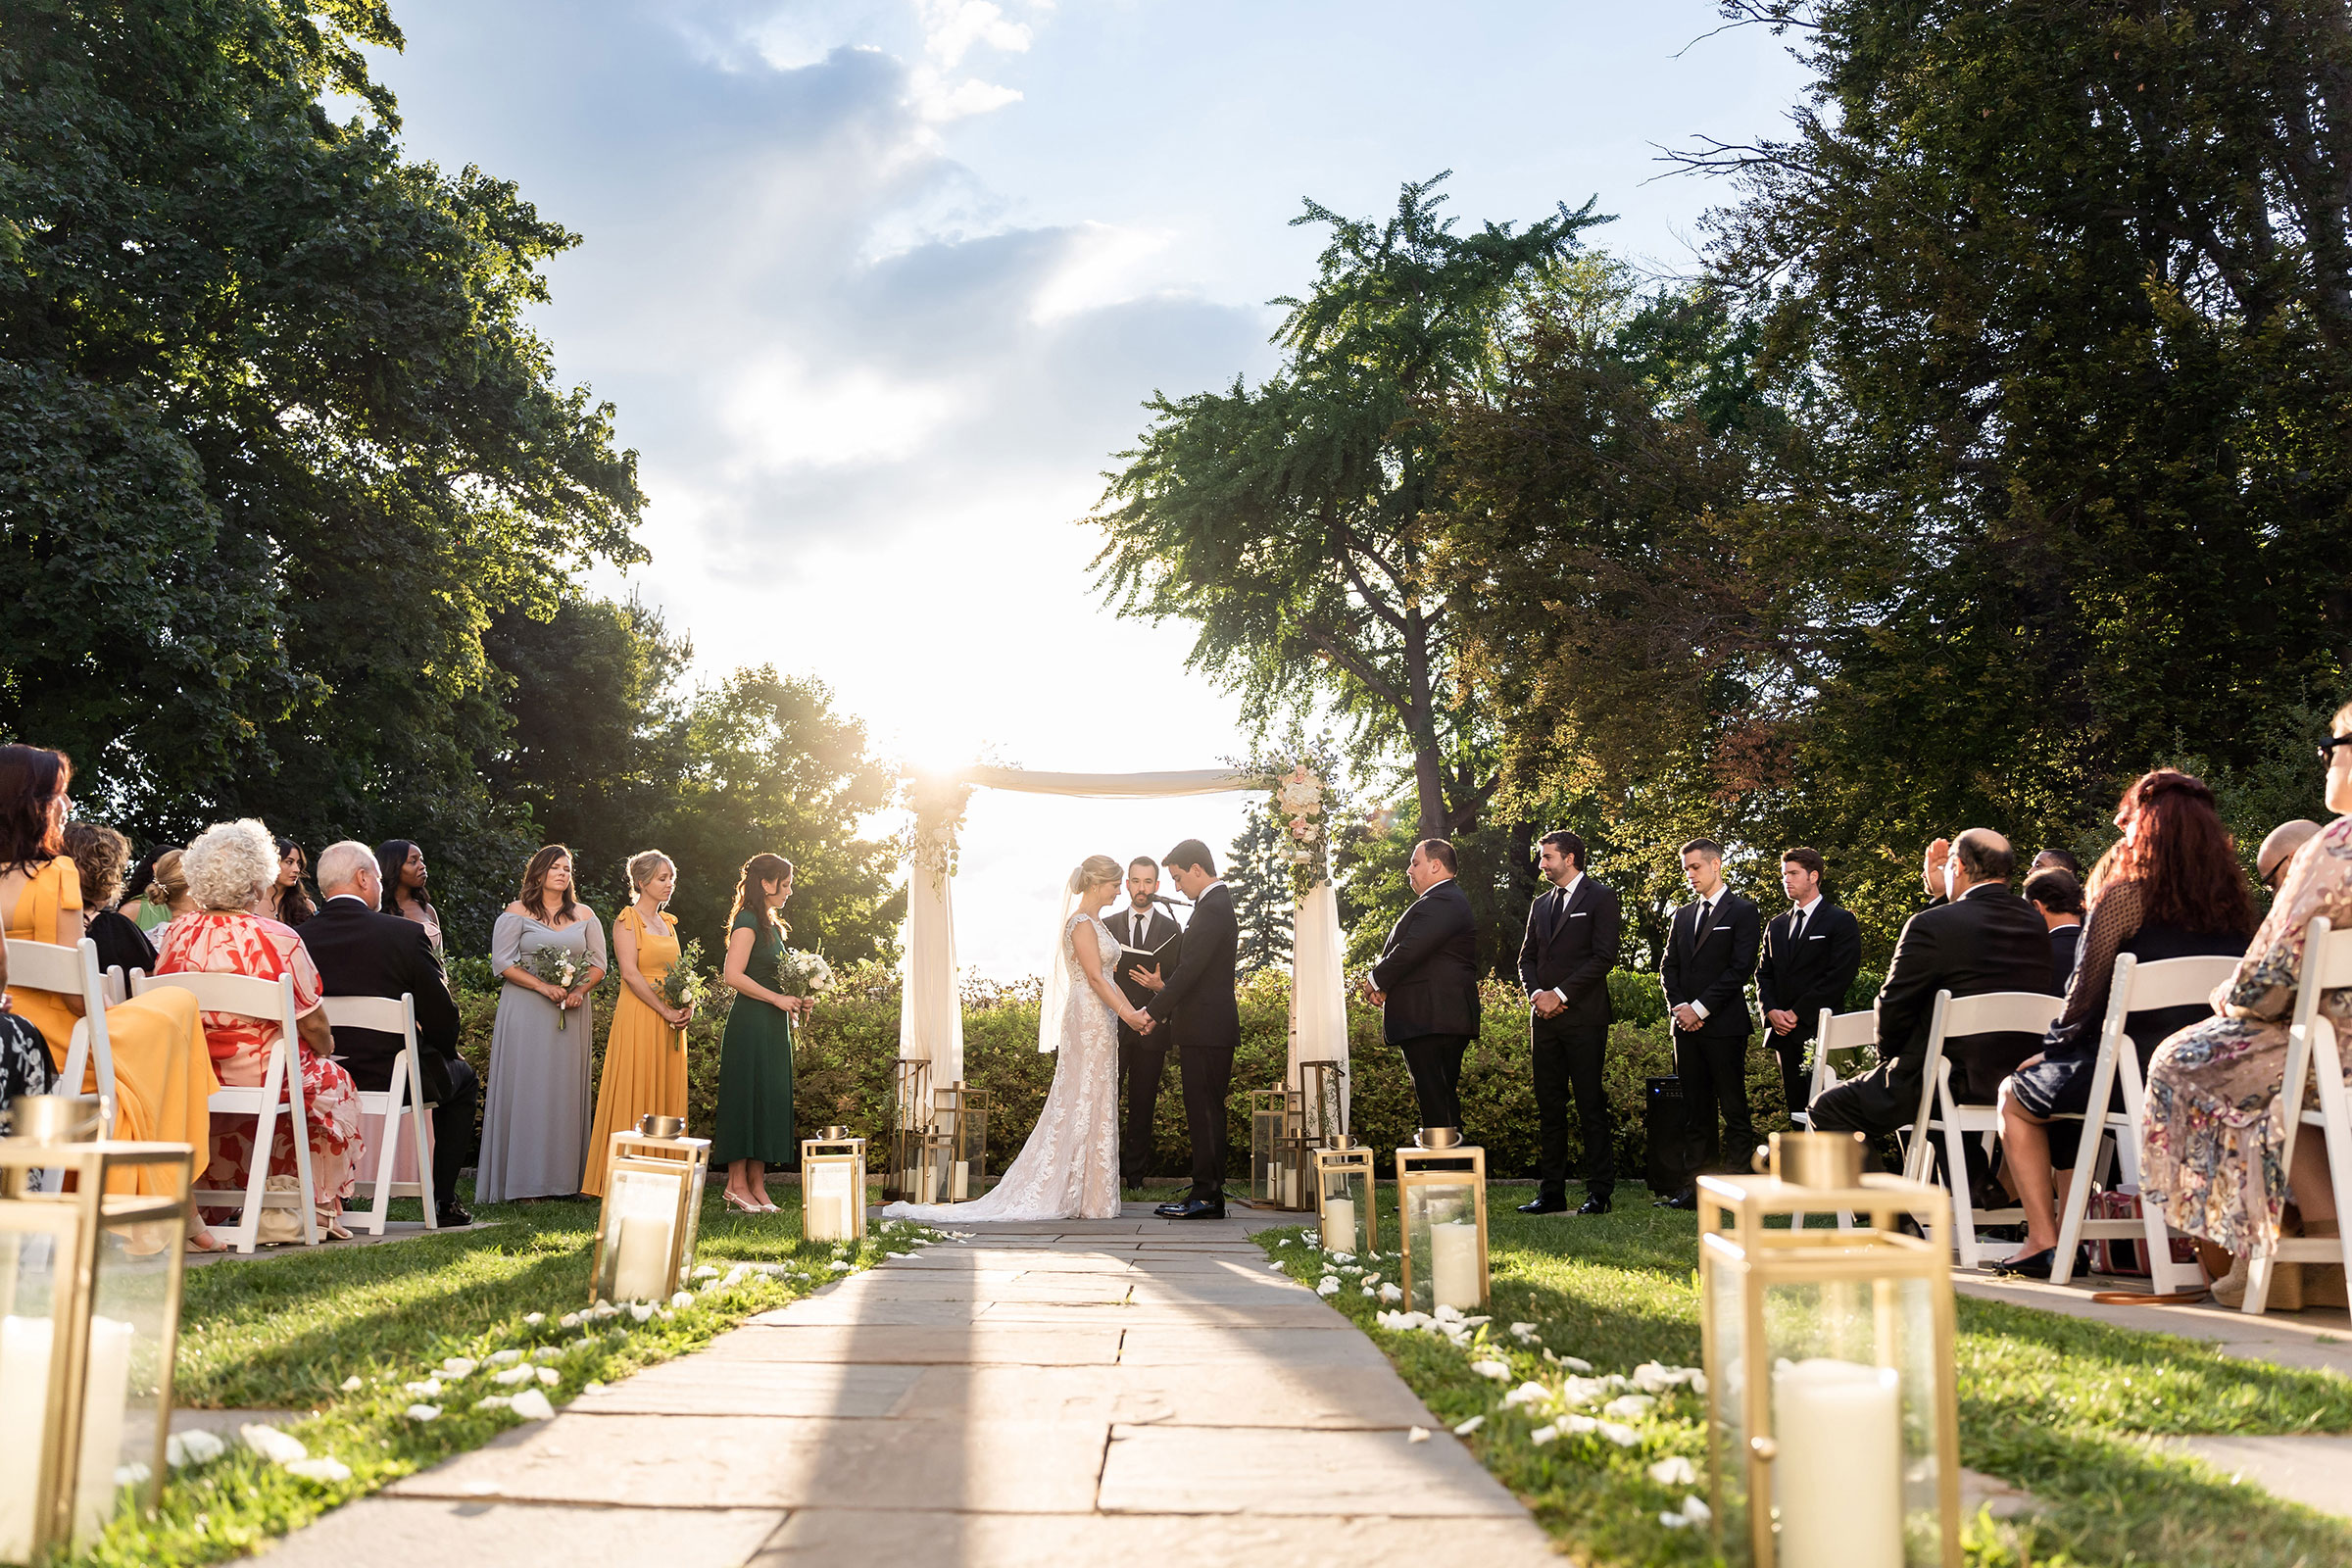 The Briarcliff Manor wedding video